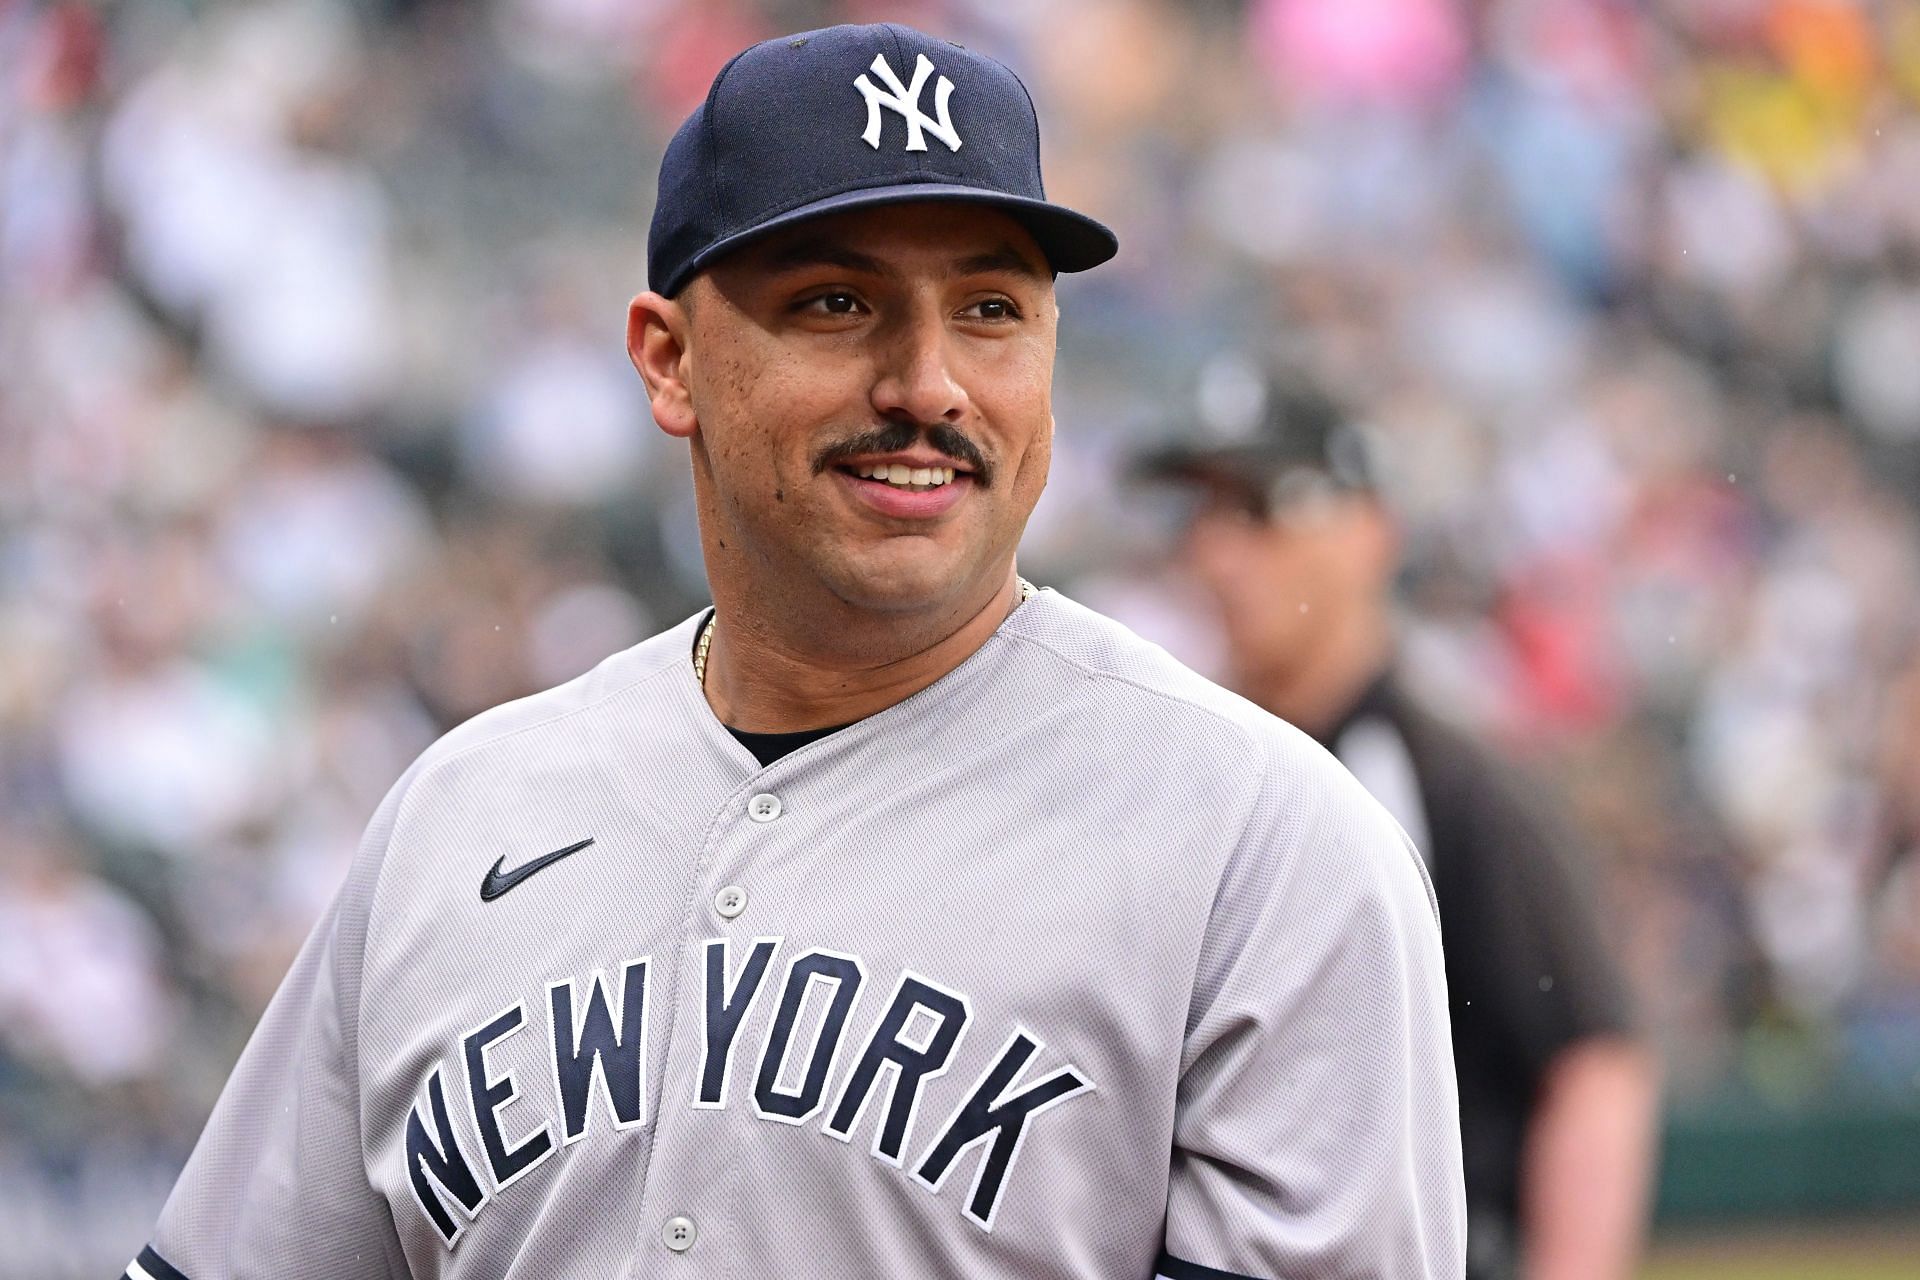 Nestor Cortes and Matt Carpenter star in Stache brothers!, He looks like  Daniel Day-Lewis in There Will Be Blood - New York Yankees fans love Matt  Carpenter sporting a mustache, share hilarious